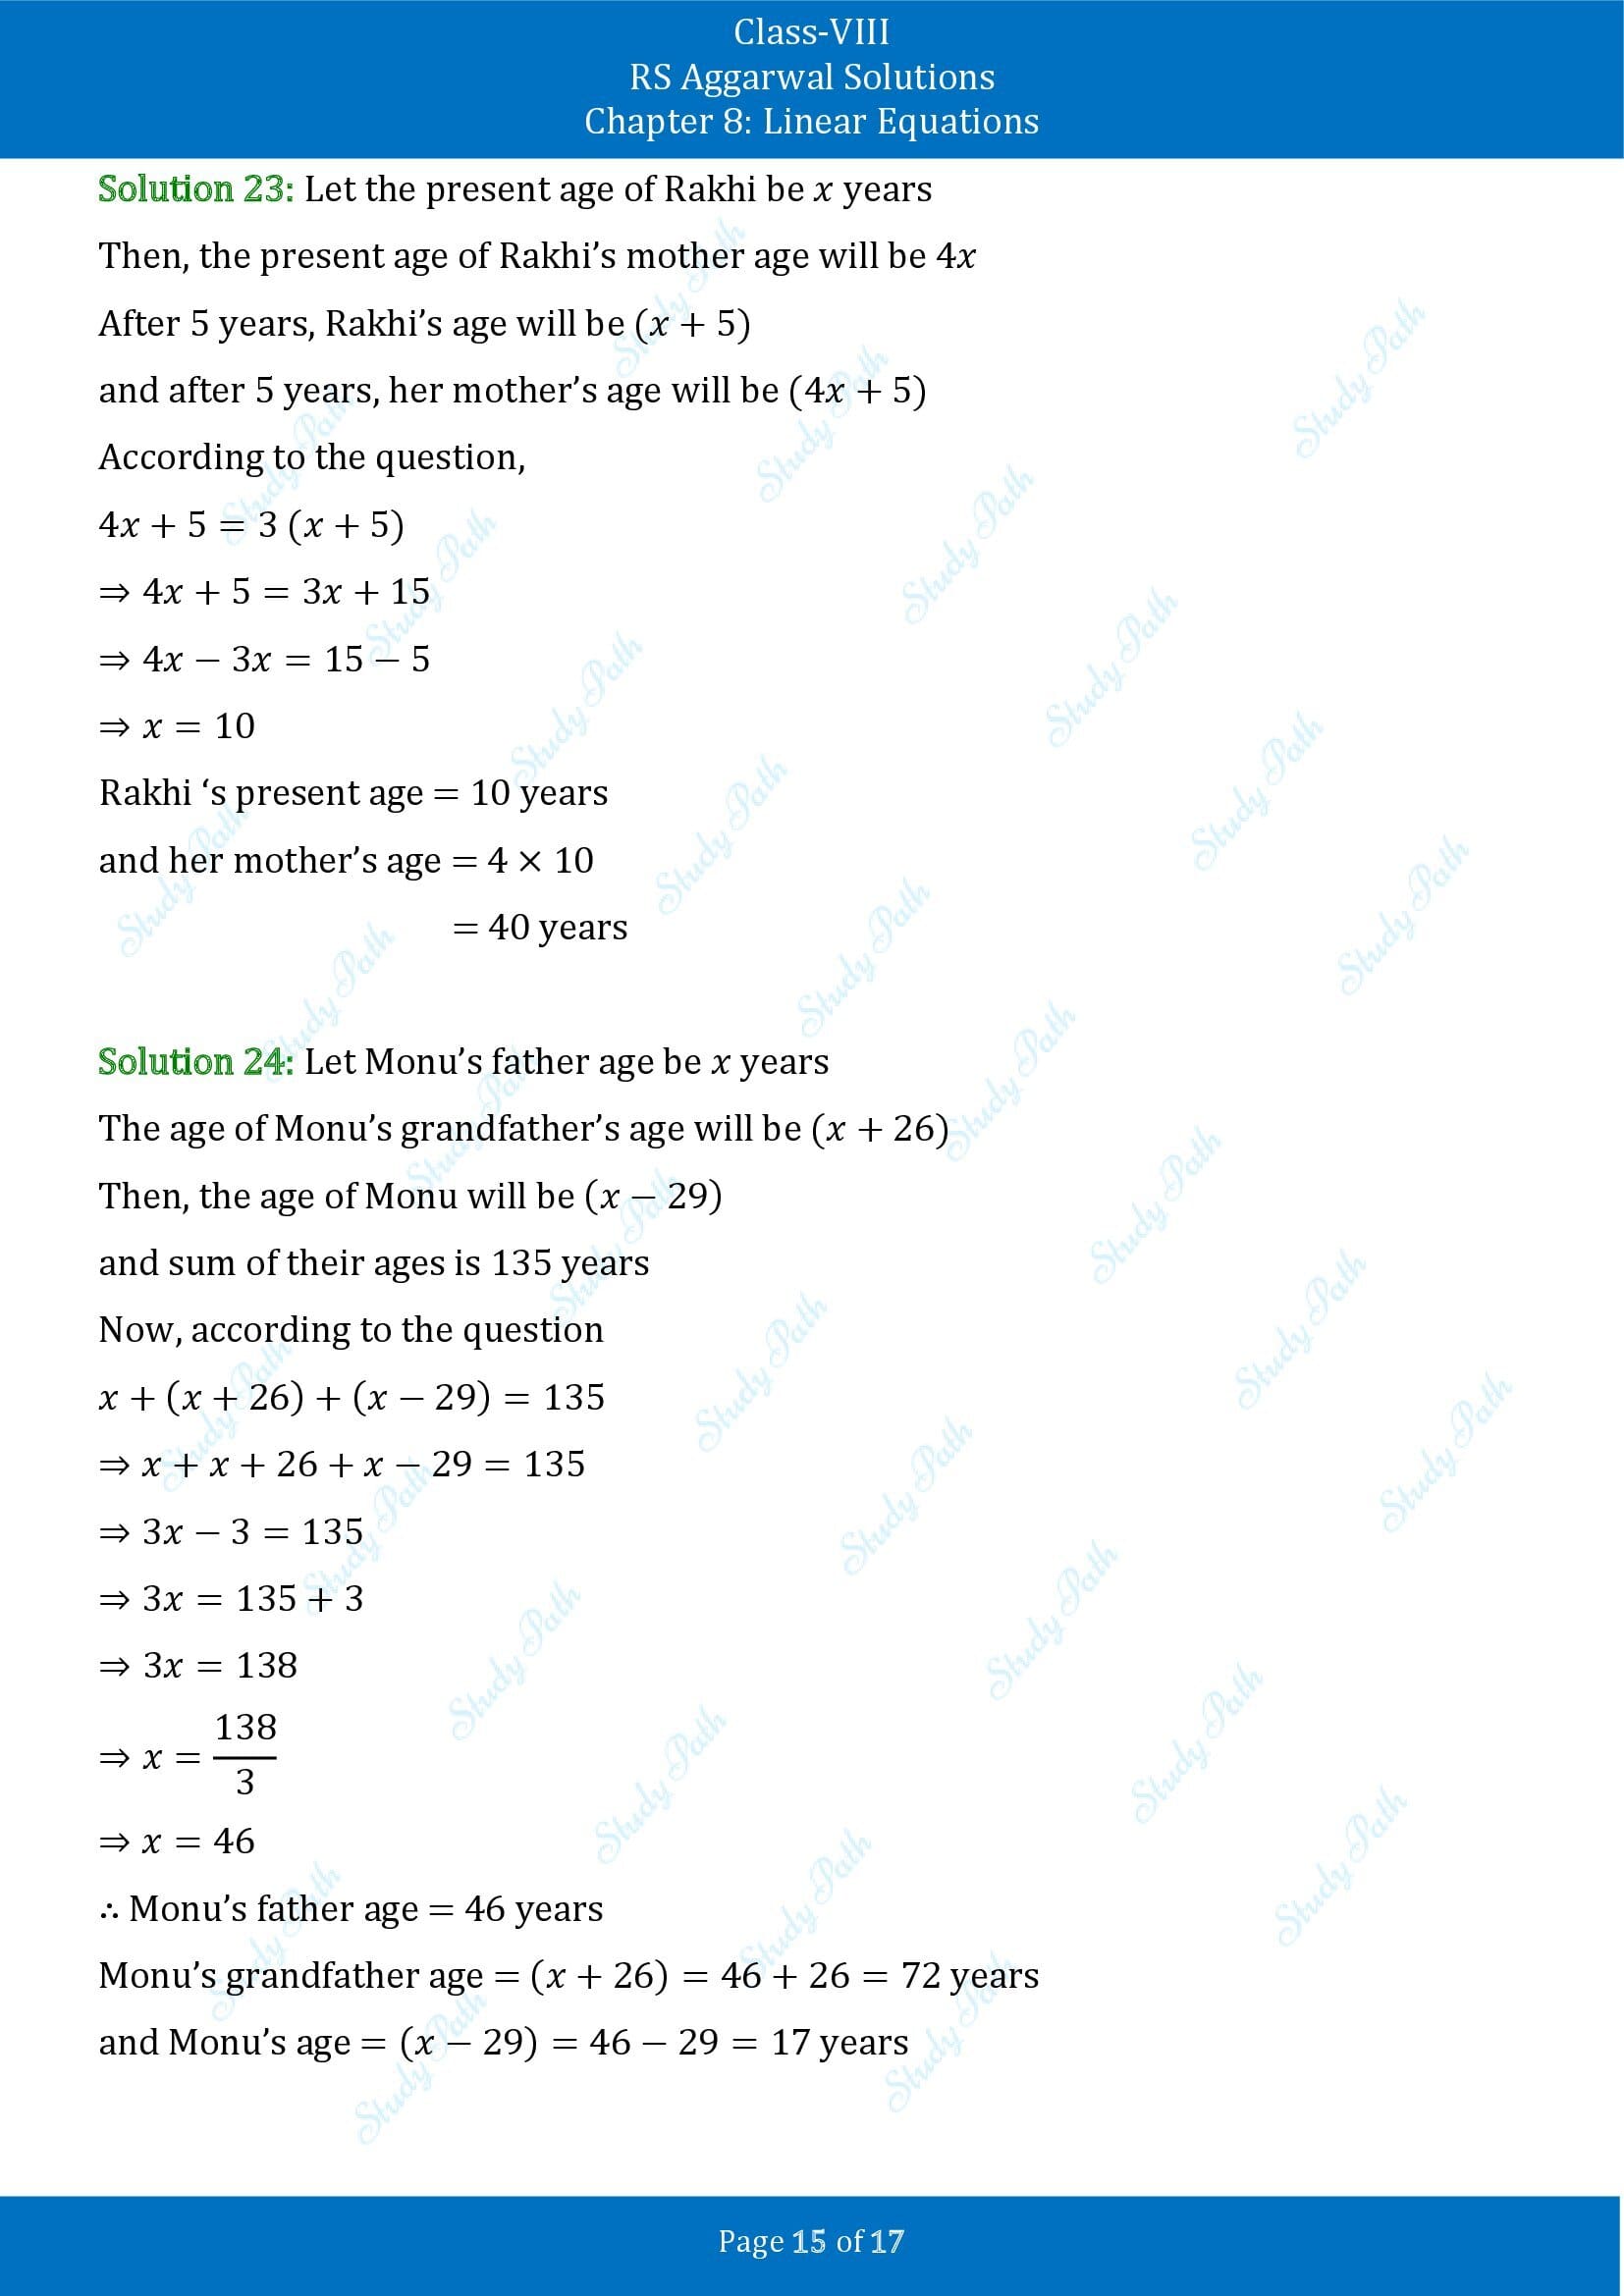 RS Aggarwal Solutions Class 8 Chapter 8 Linear Equations Exercise 8B 00015